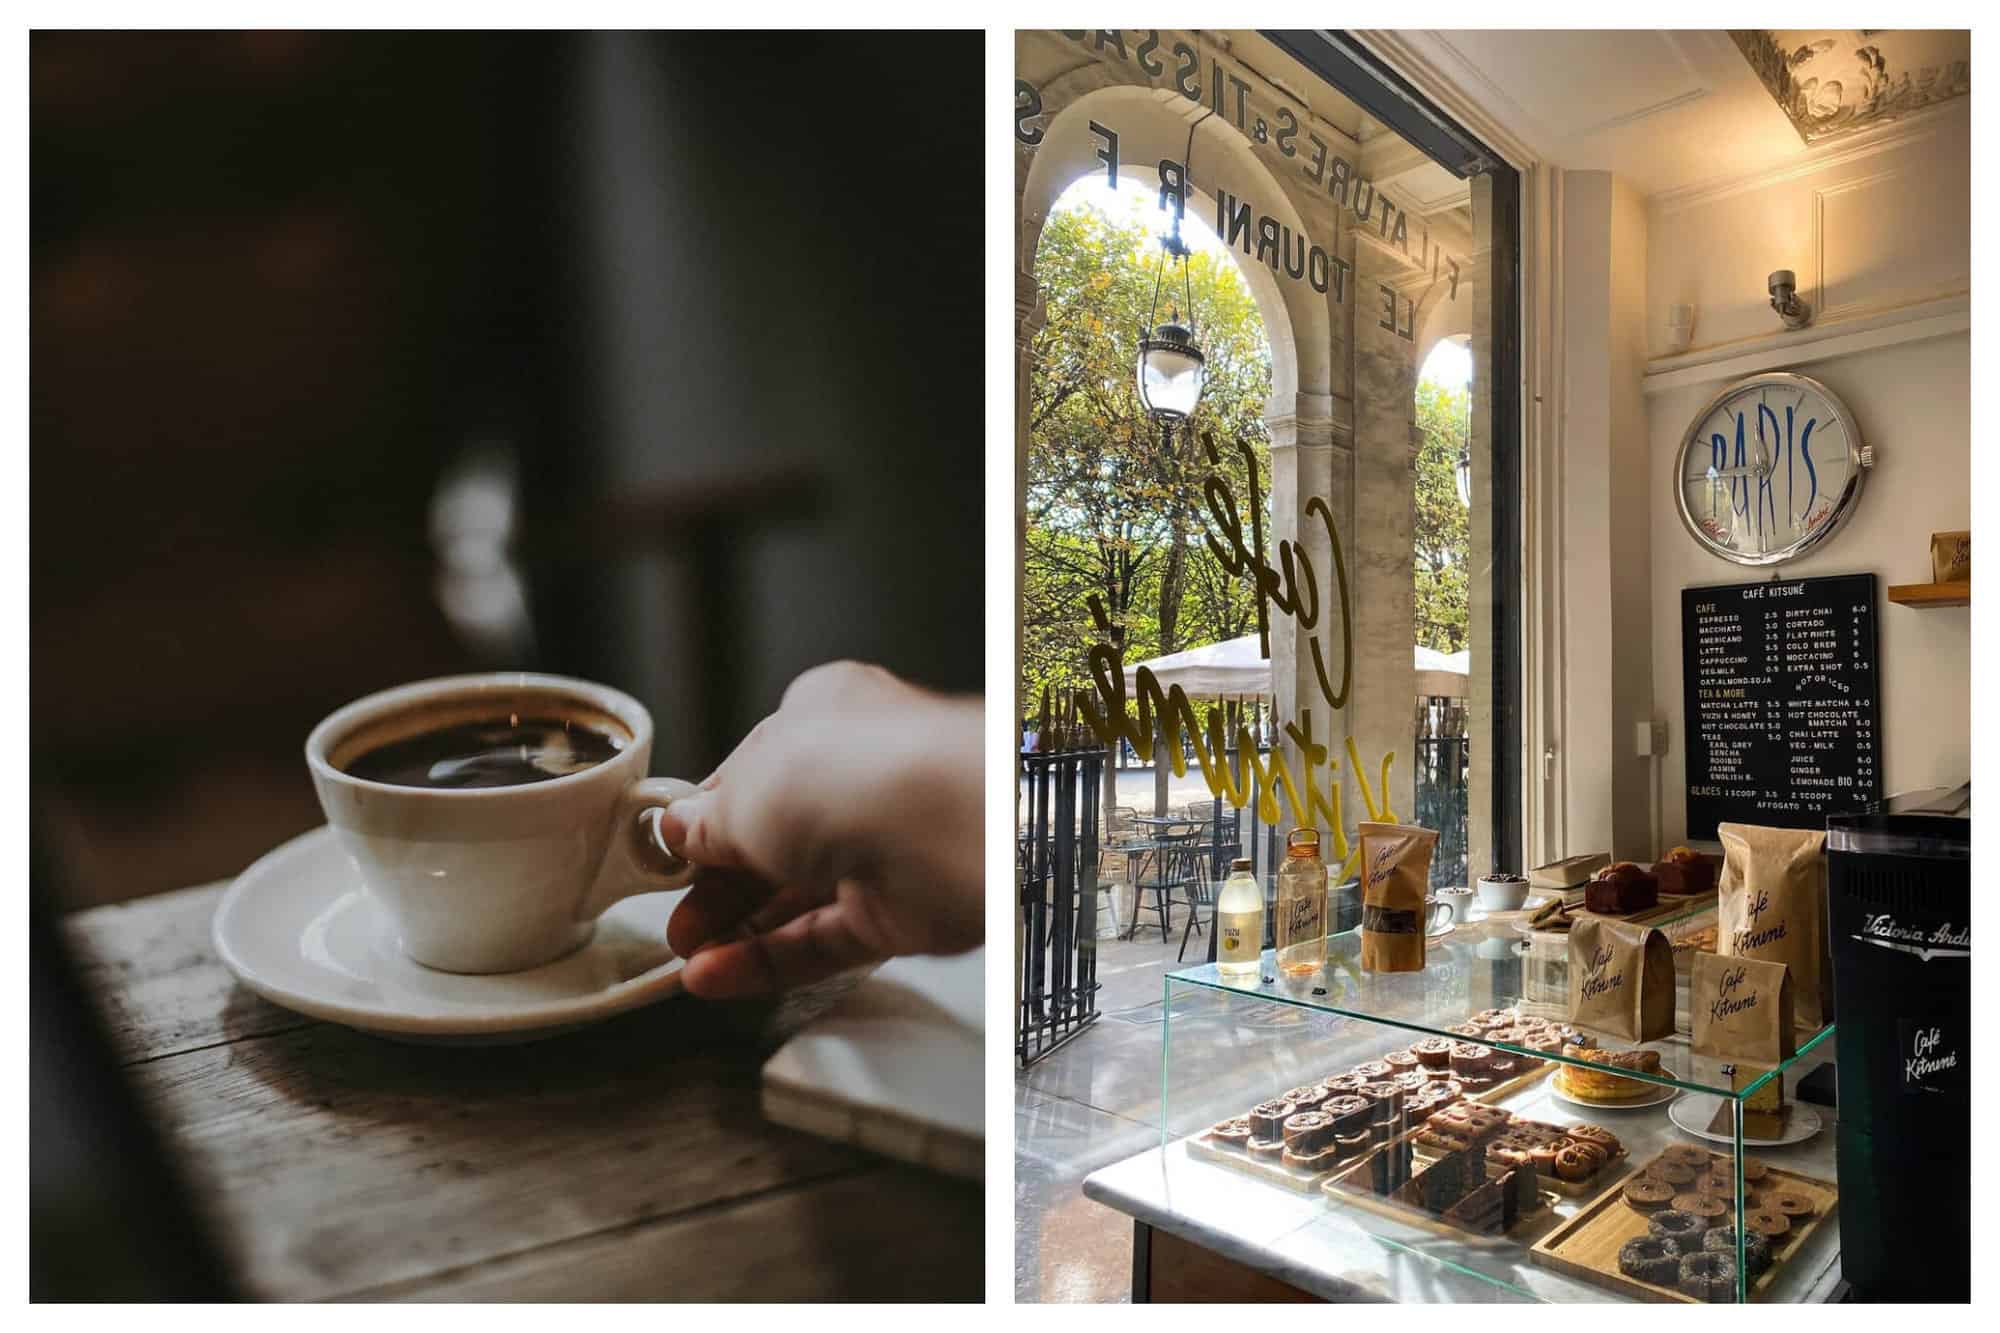 Left: a black coffee on a white plate and mug. Right: the interior of a cafe in Paris, looking outside onto the street.